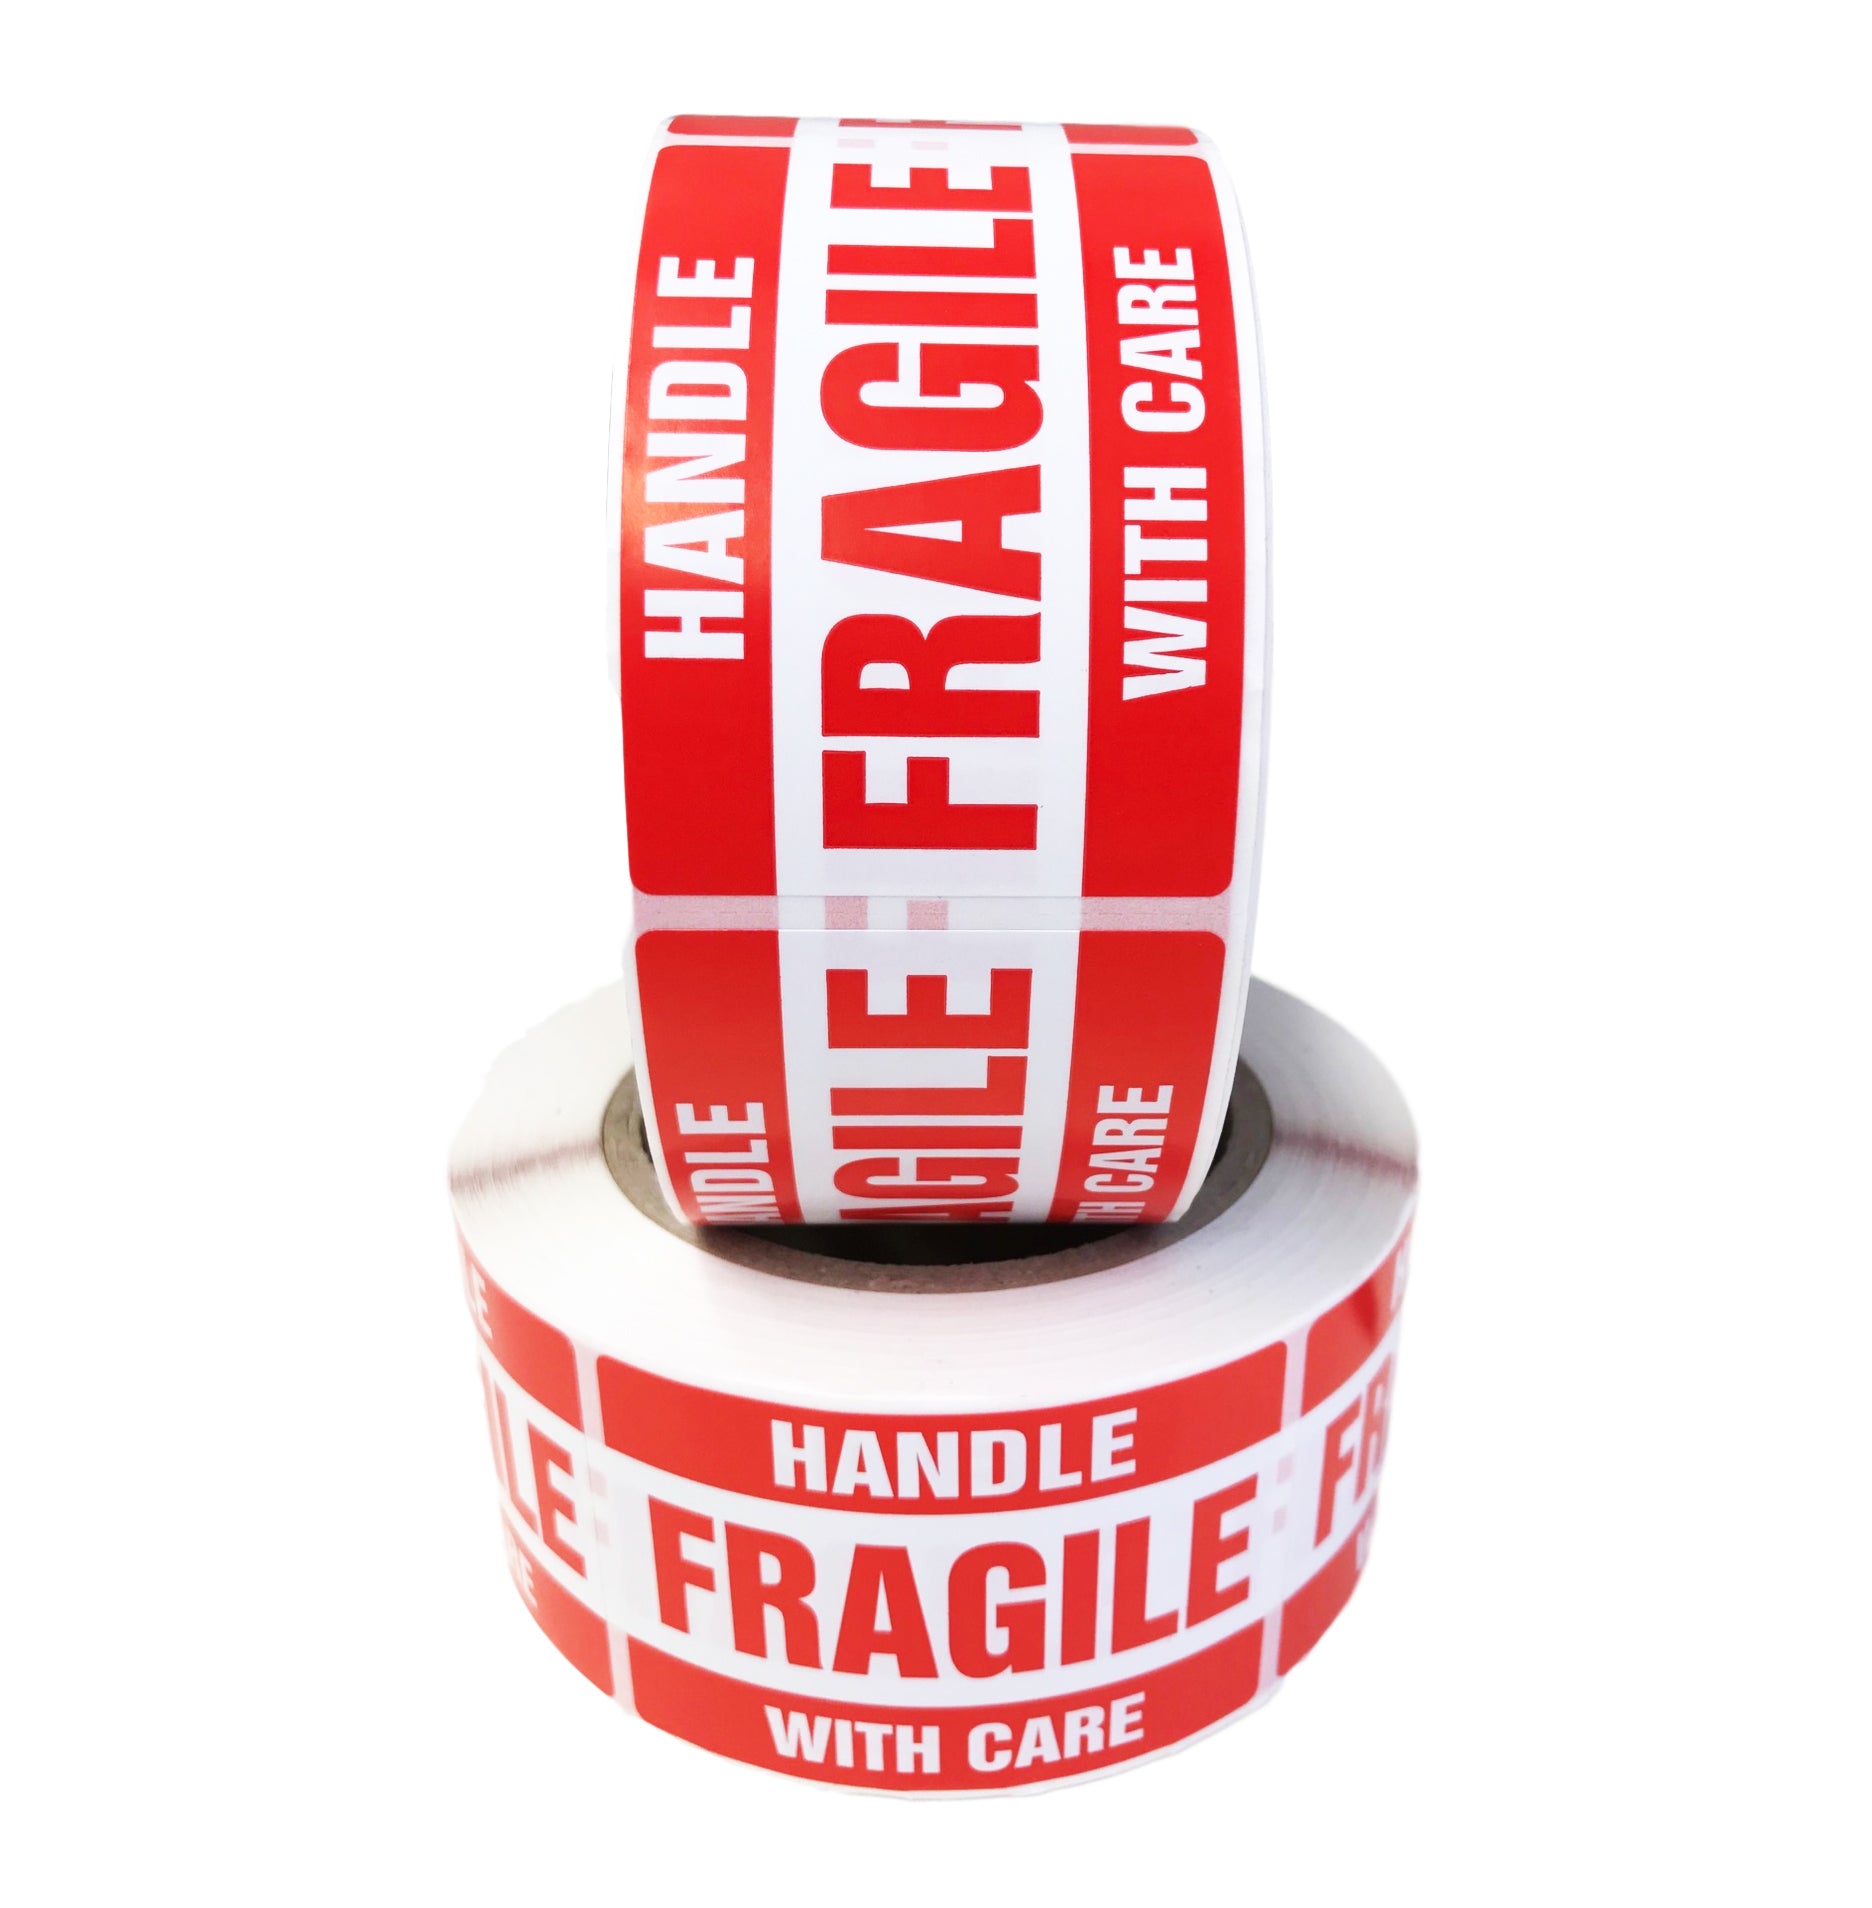 Fragile Label 50.8x76.2mm Handle With Care Adhesive Sticker 550 Labels/Roll